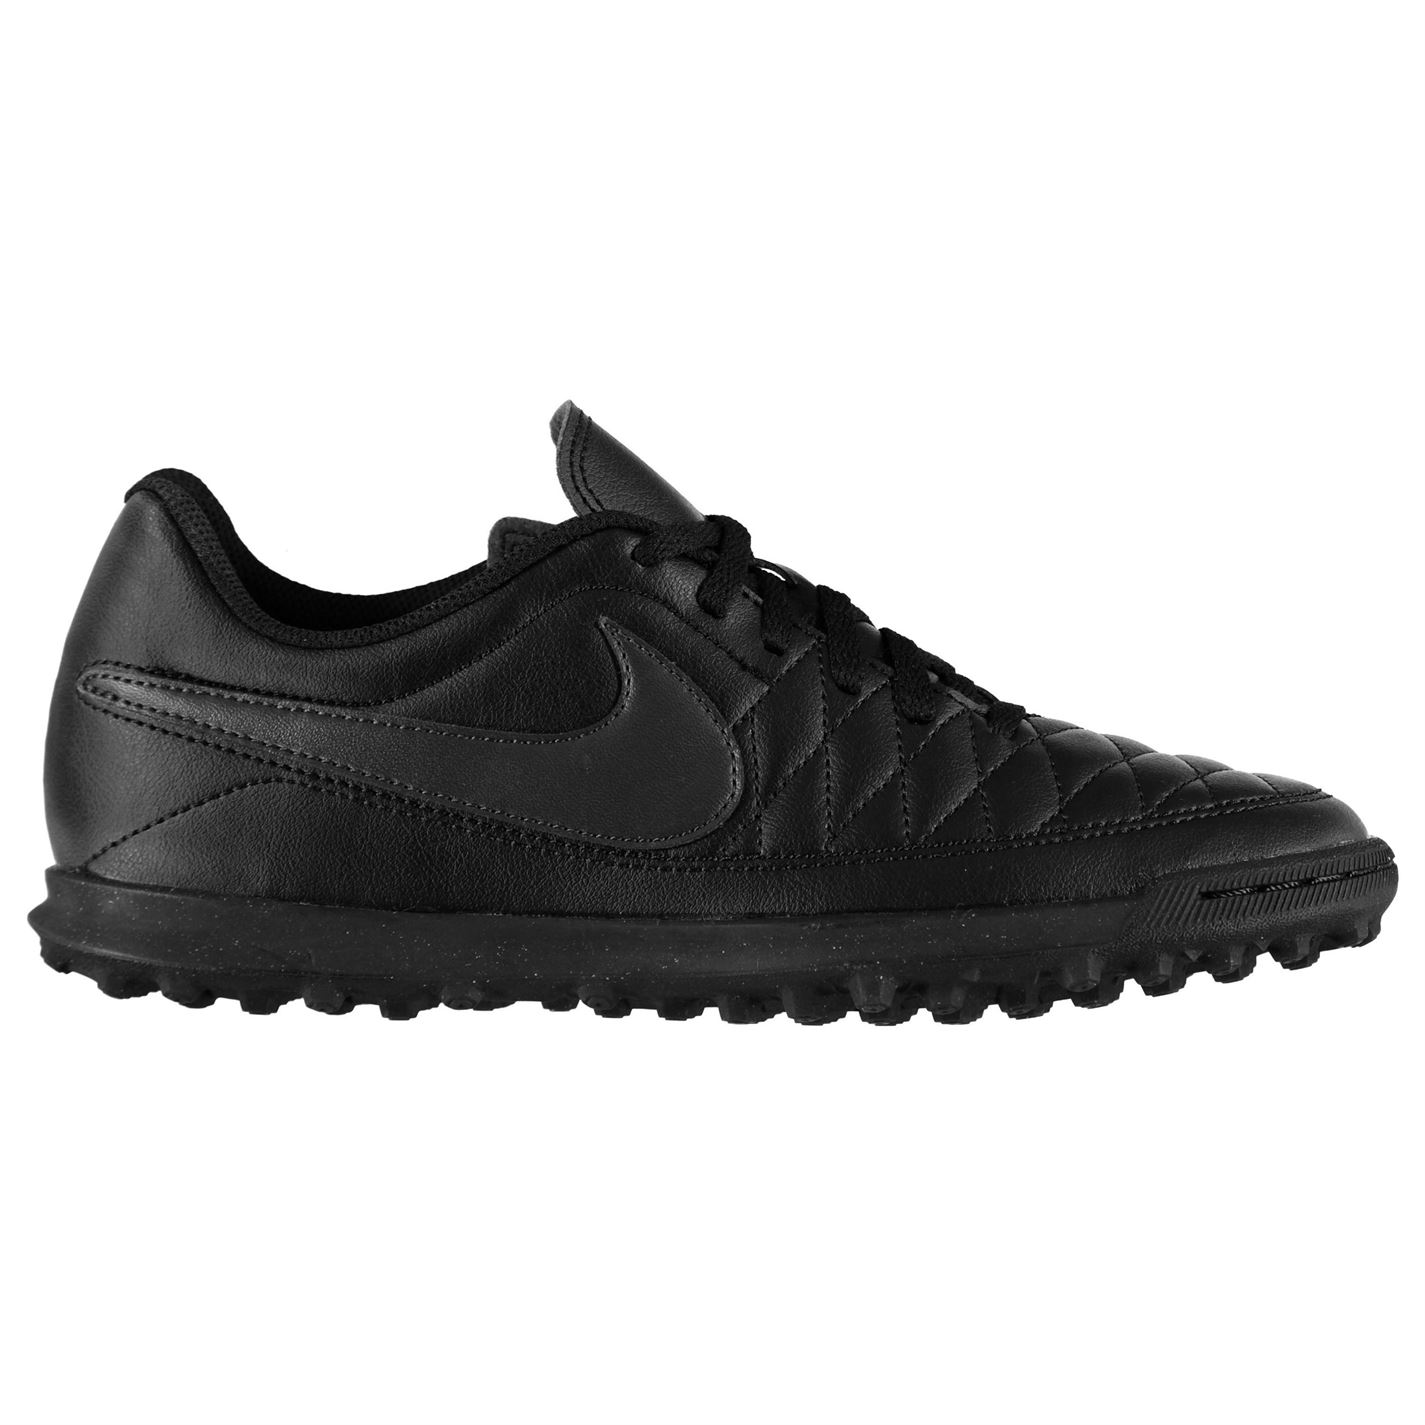 Nike Majestry TF Mens Football Trainers